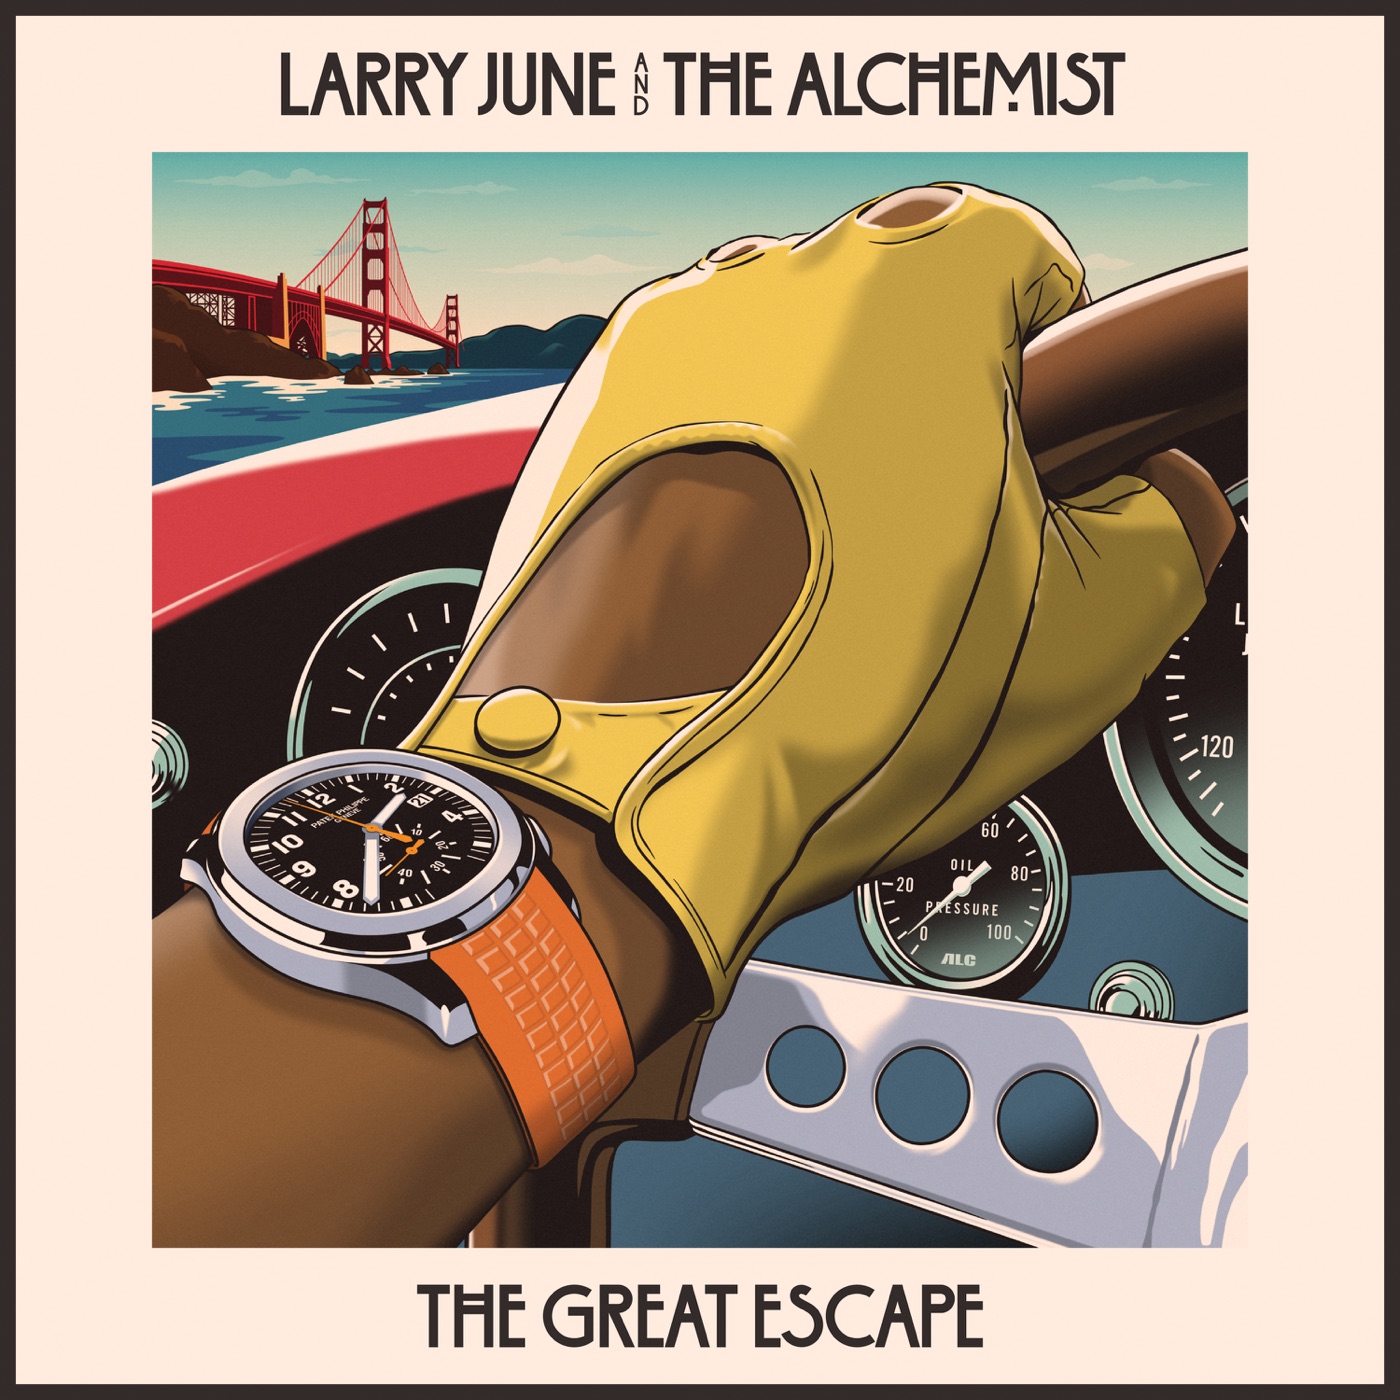 The Great Escape by Larry June, The Alchemist